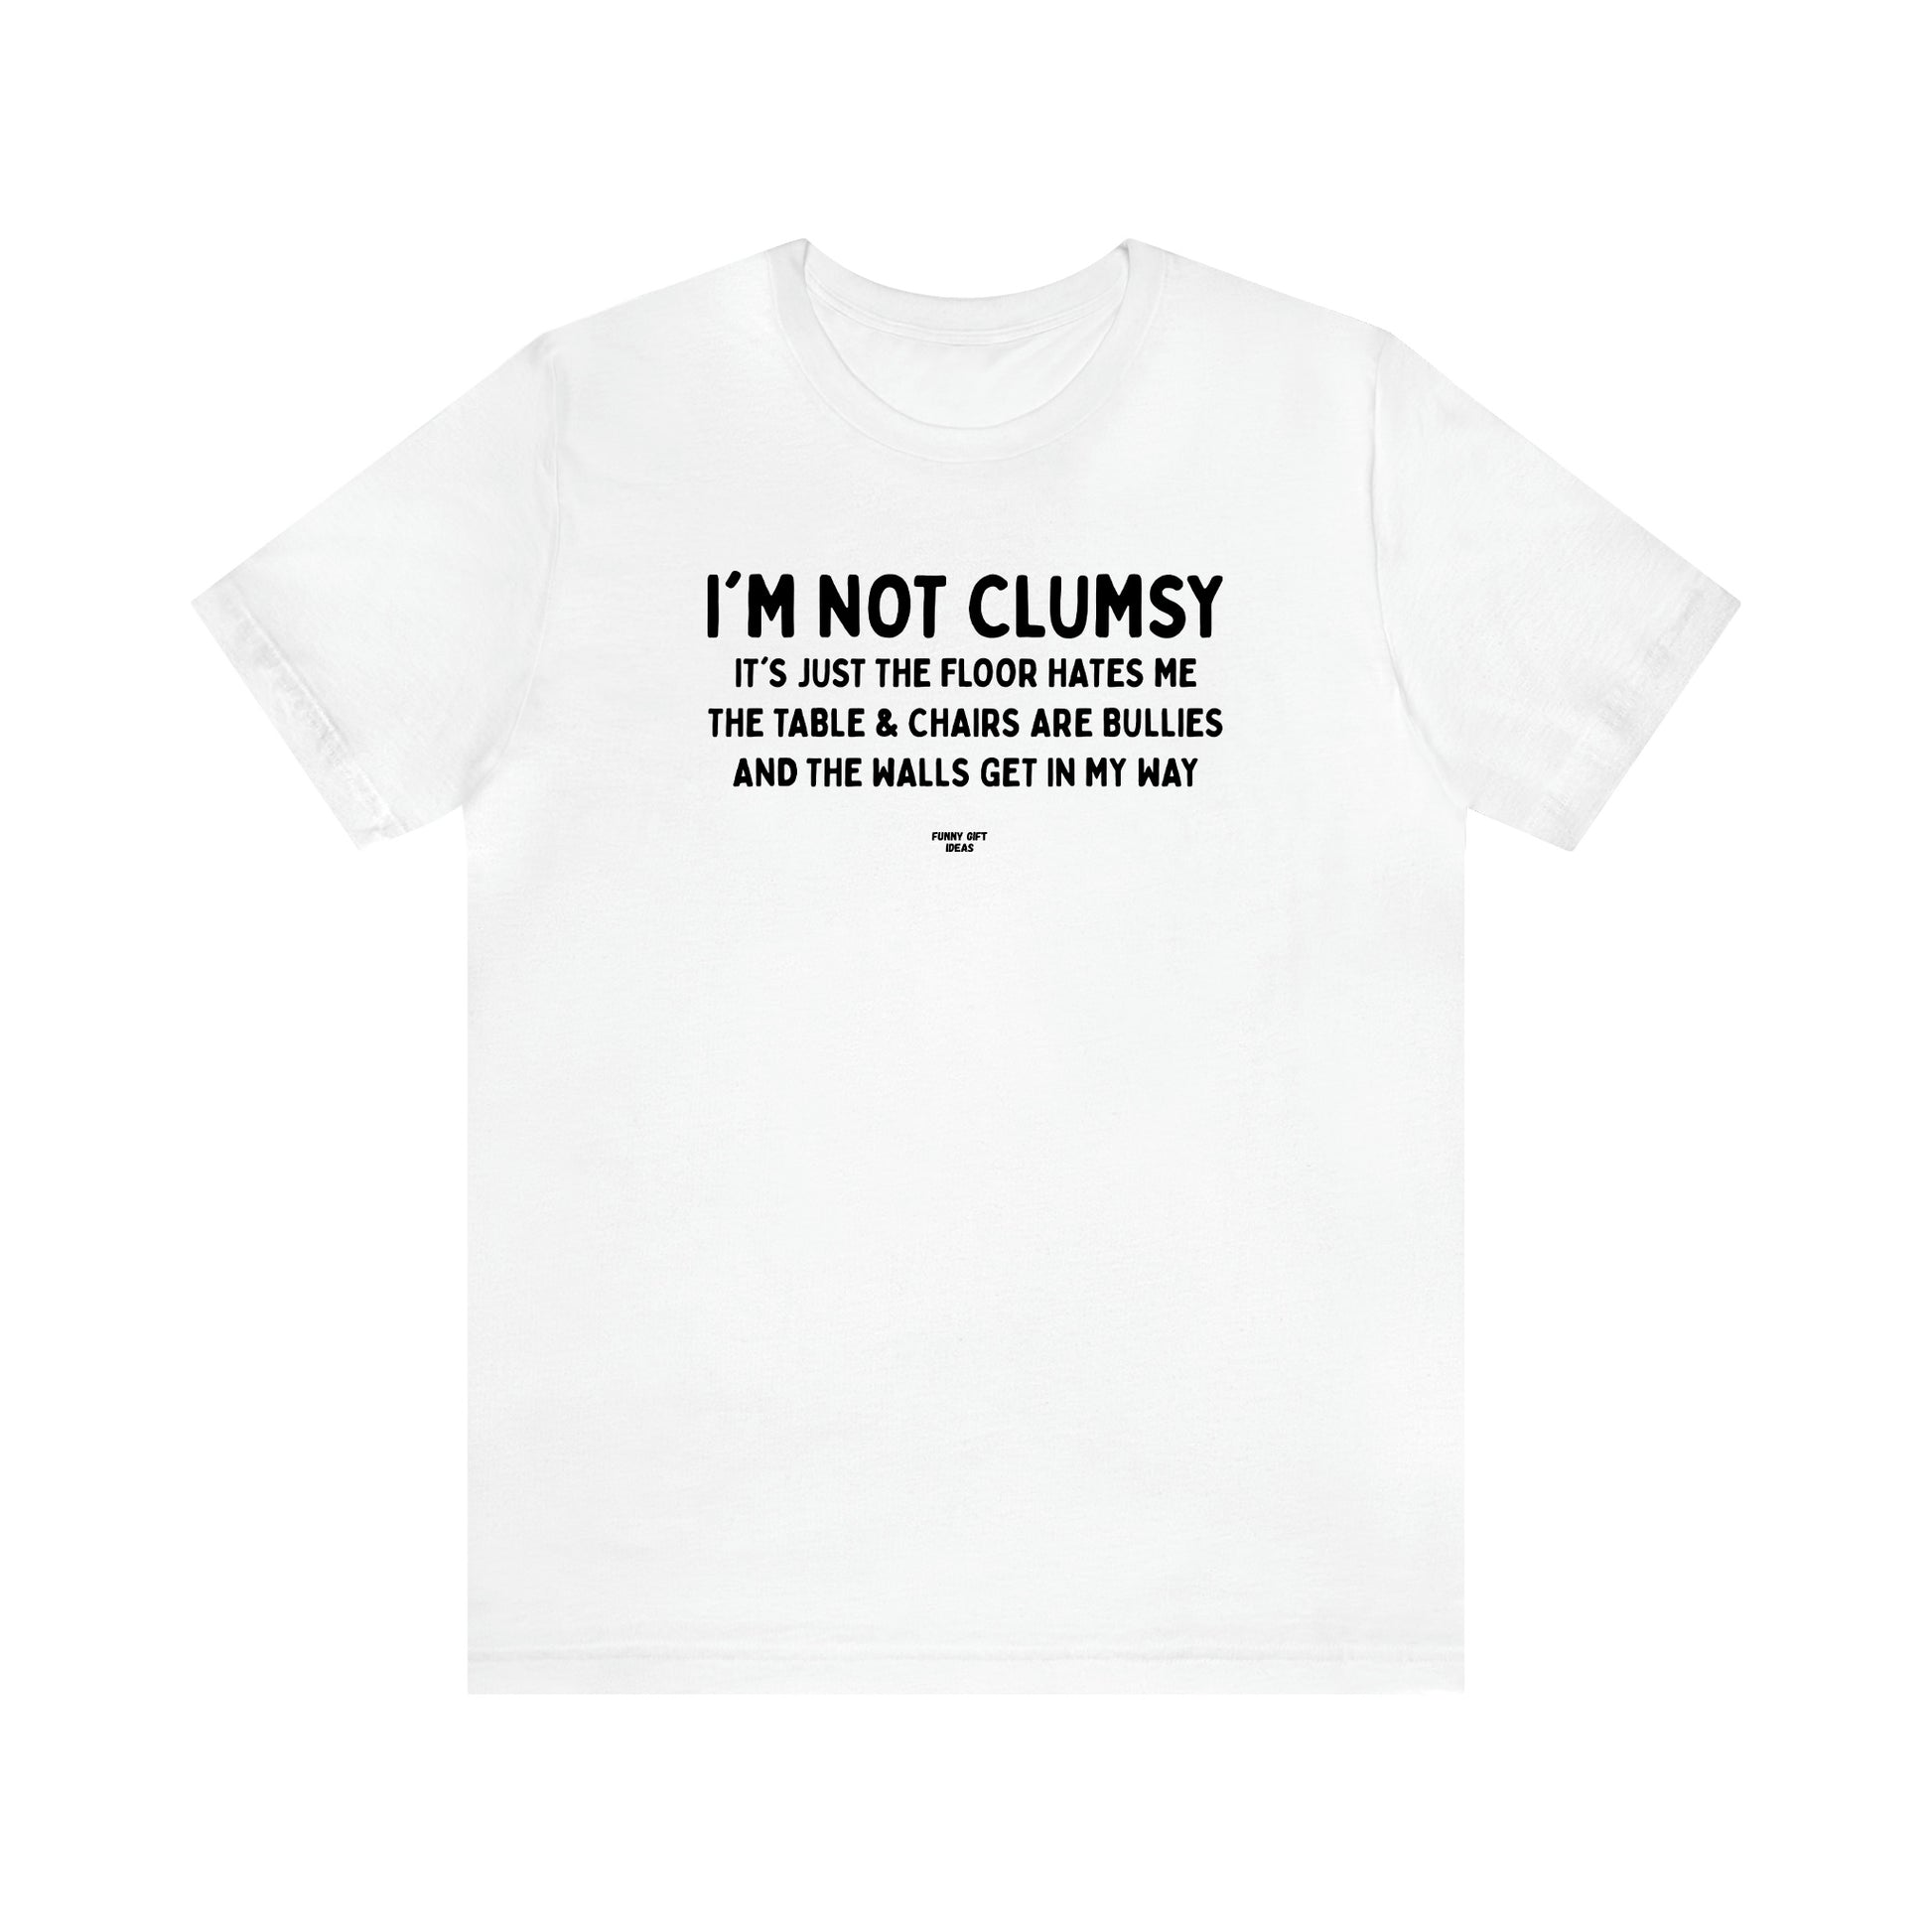 Men's T Shirts I'm Not Clumsy It's Just the Floor Hates Me the Table & Chairs Are Bullies and the Walls Get in My Way - Funny Gift Ideas